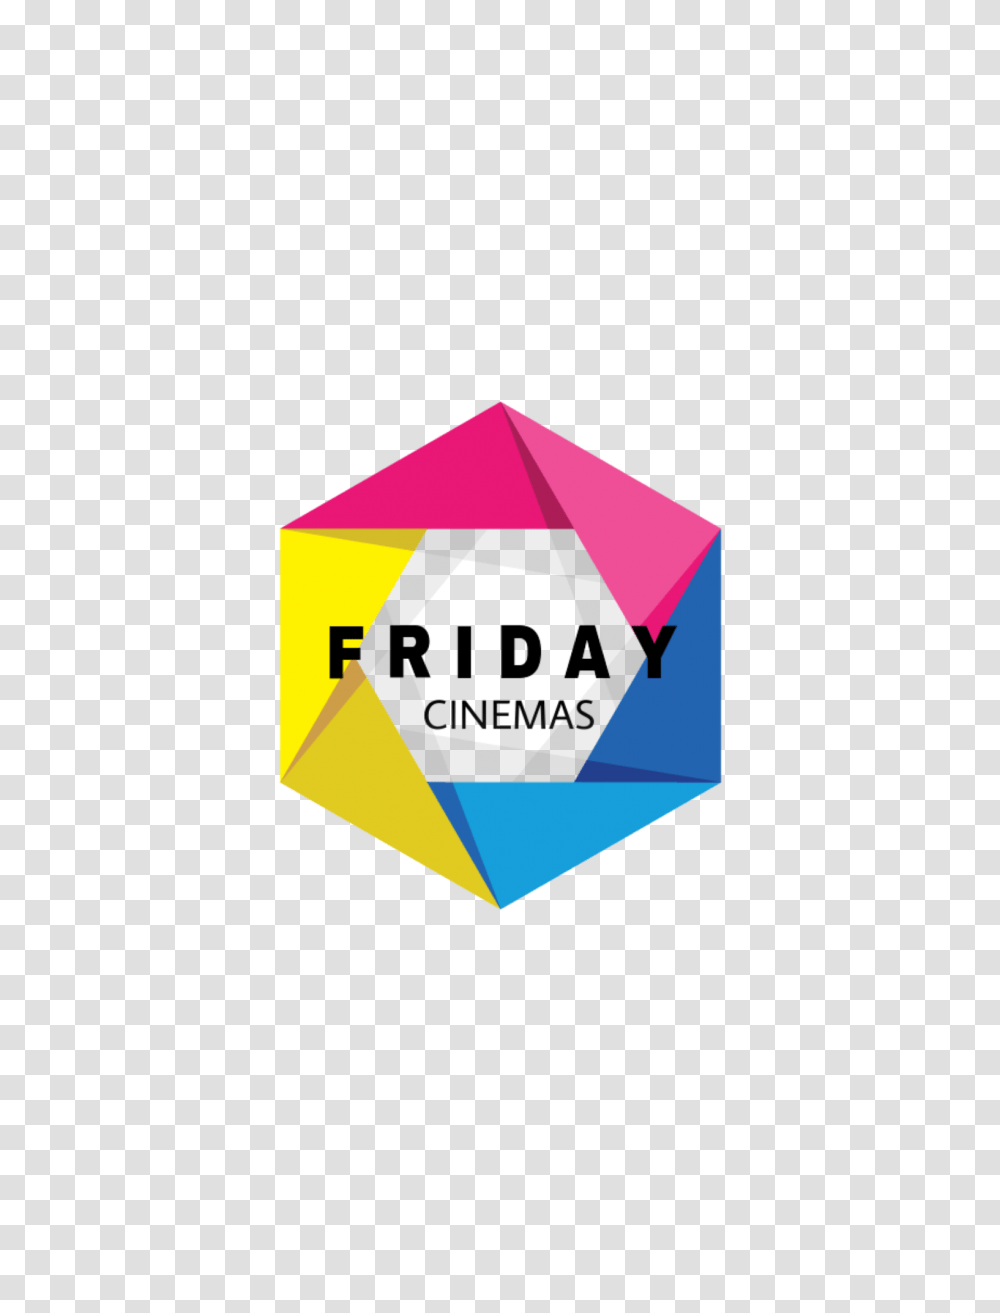 Logo Offical New Friday Cinemas, Crystal, Rubix Cube, Accessories Transparent Png